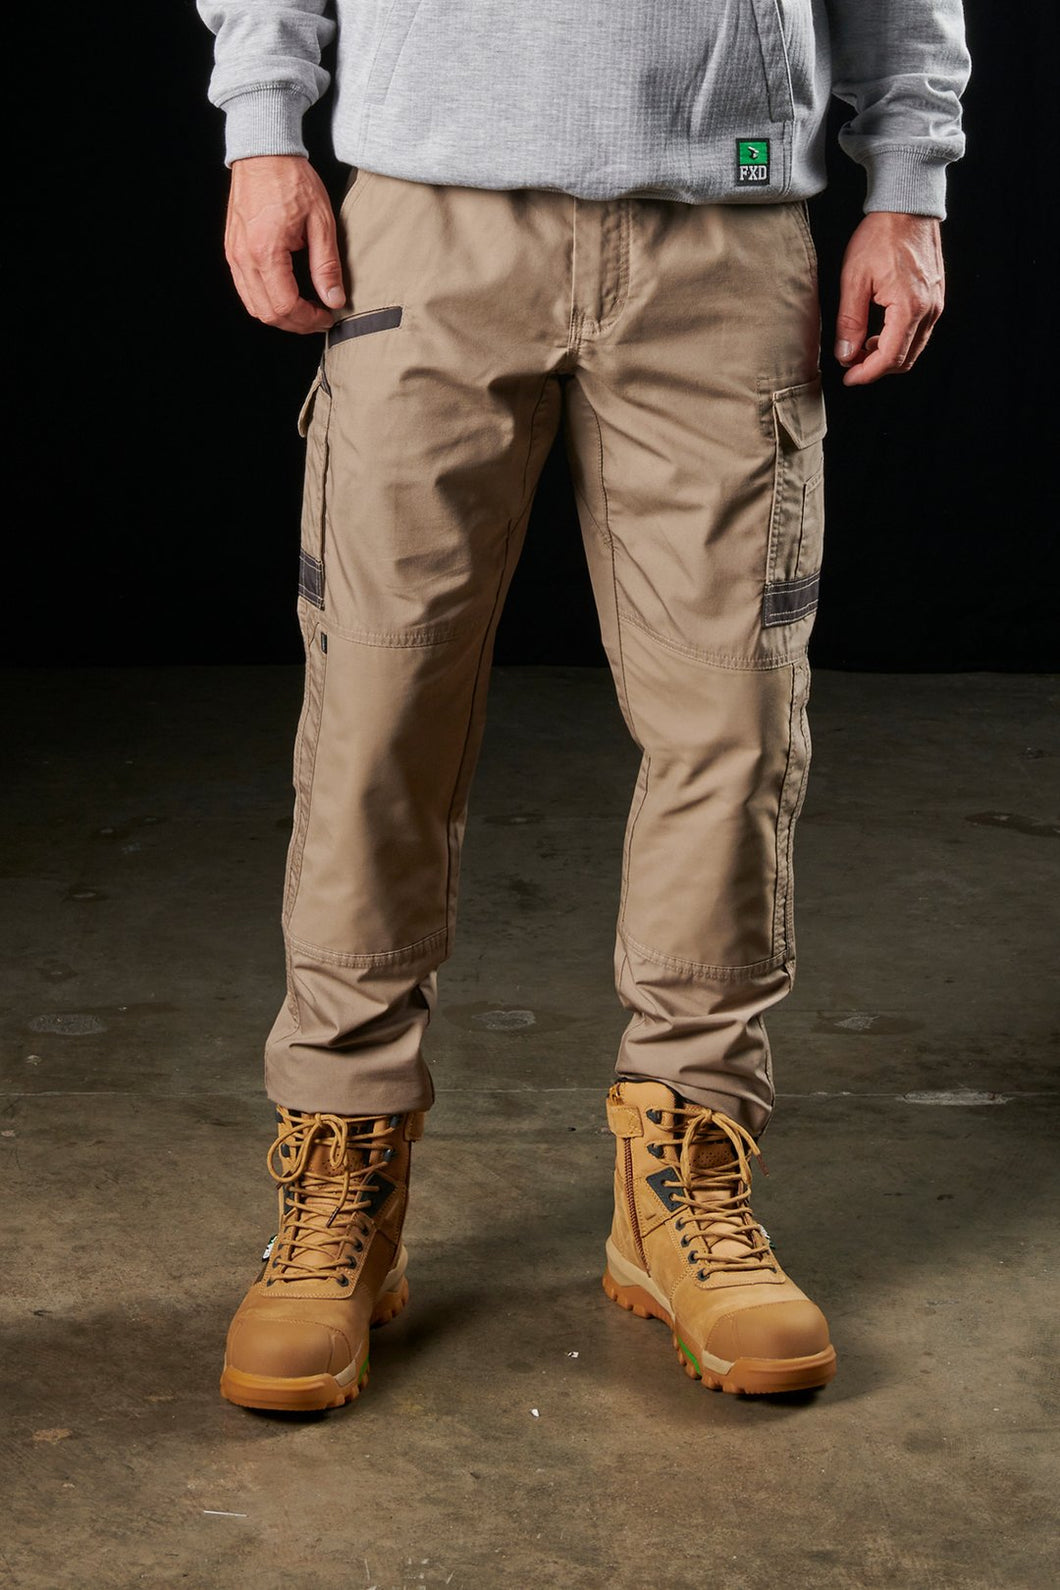 FXD WP-5 Stretch Work Pants